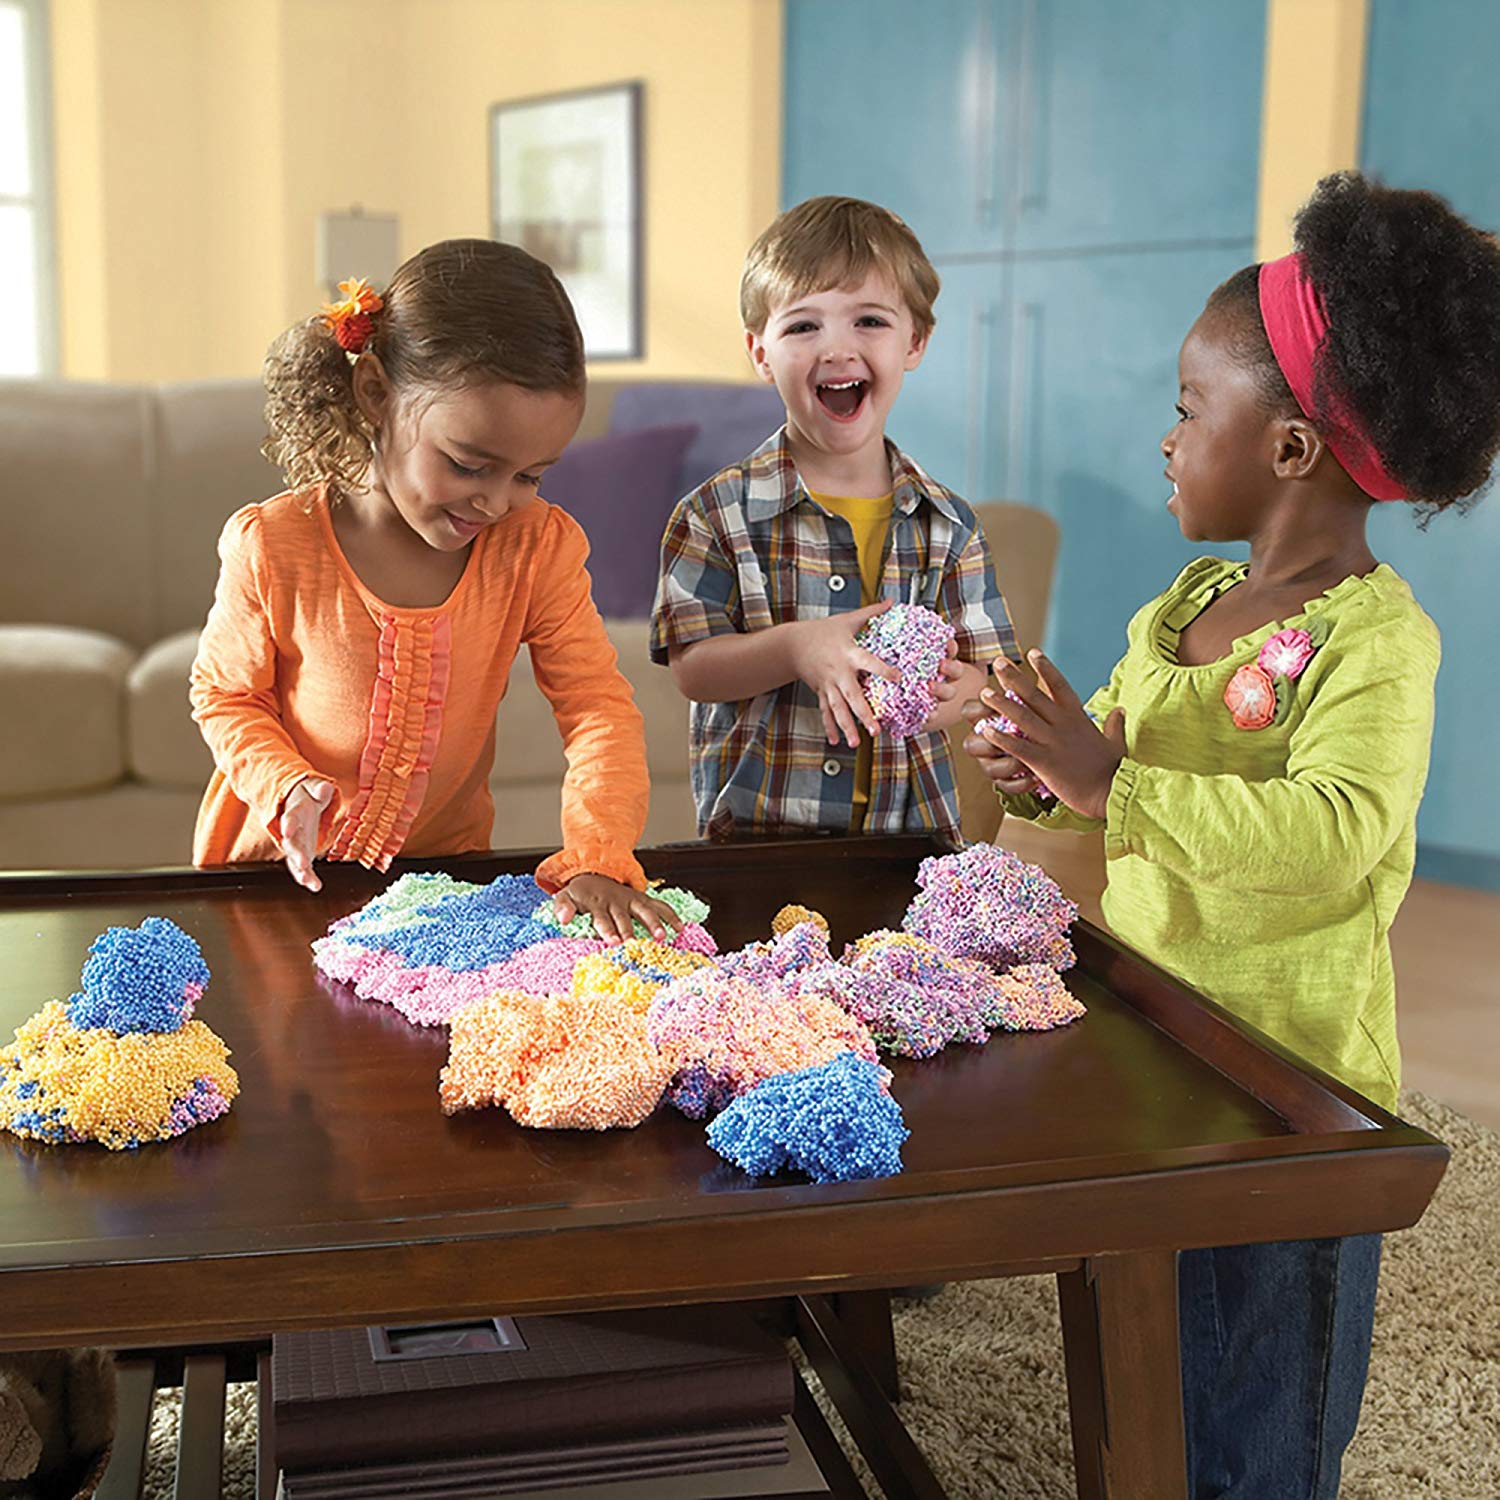 Playfoam® Sparkle Starter 4-Pack, Get set to sparkle with mesmerising Playfoam® Sparkle. It’s the everlasting squish that can be sculpted, squeezed, smushed and rolled into shape, with a dash of sparkle for extra squishing fun. Playfoam is an award-winning sensory play toy. The bead-like structure of Playfoam® Sparkle can be sculpted and squeezed into shape. Playfoam® Sparkle can be used straight from the packaging, only sticks to itself and never dries out. It offers countless hours of creative play fun. S